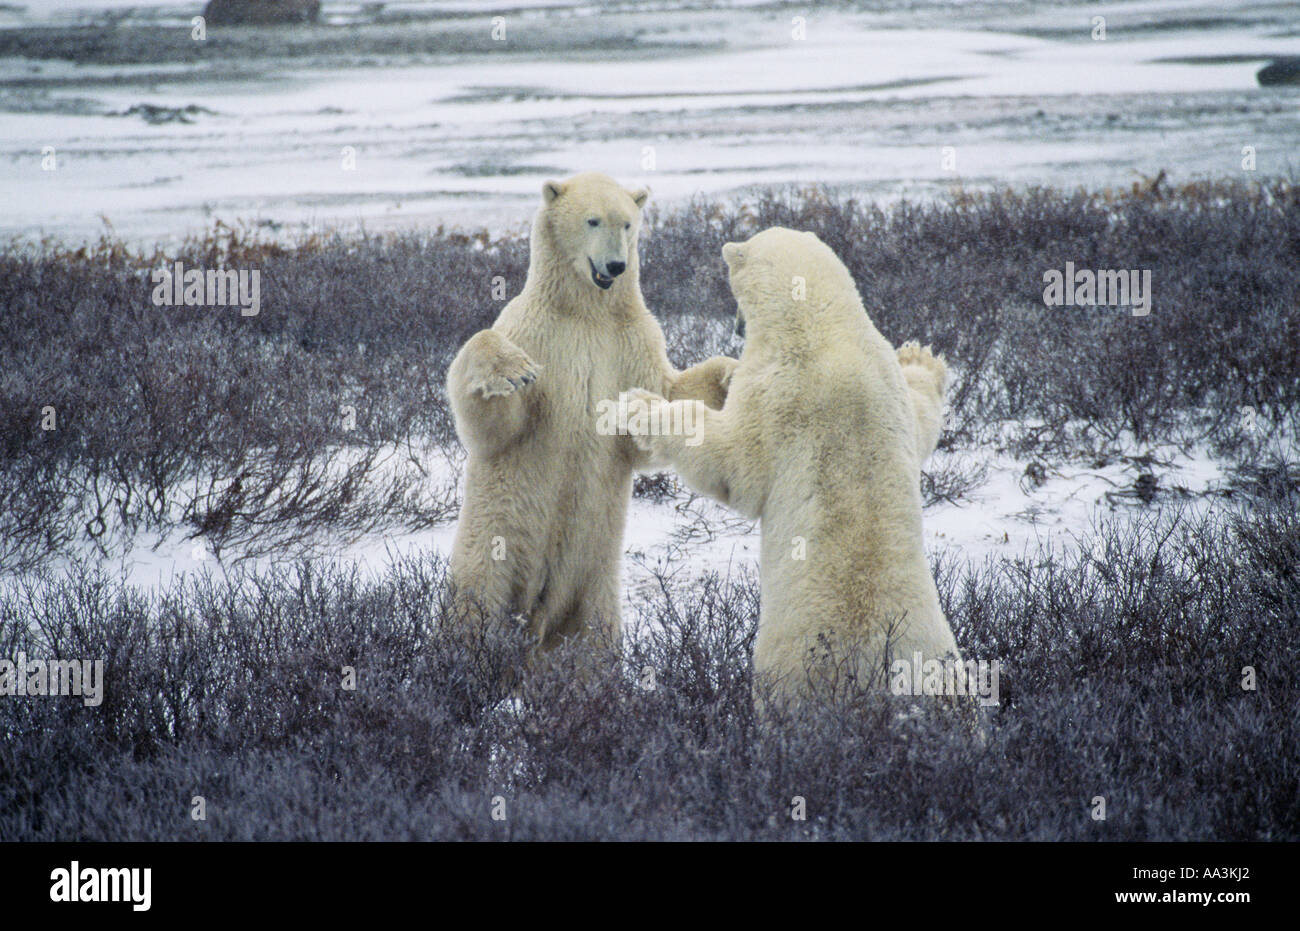 Les ours polaires playfighting Churchill, Manitoba Canada Banque D'Images